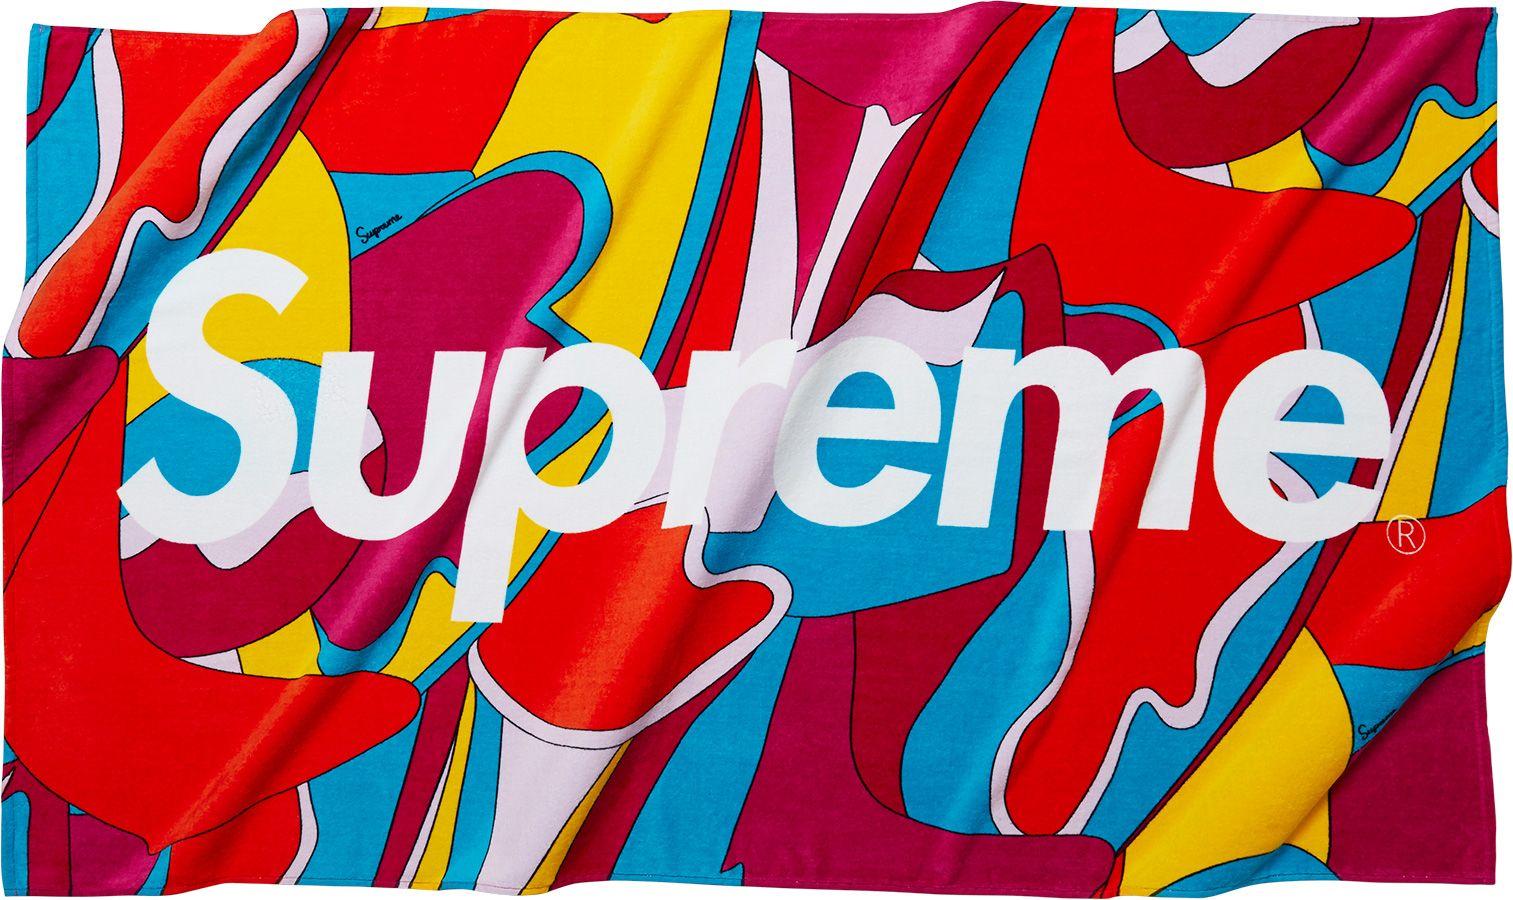 Supreme Beach Logo - The Collectibles That Prove Supreme Is Much More Than Clothes